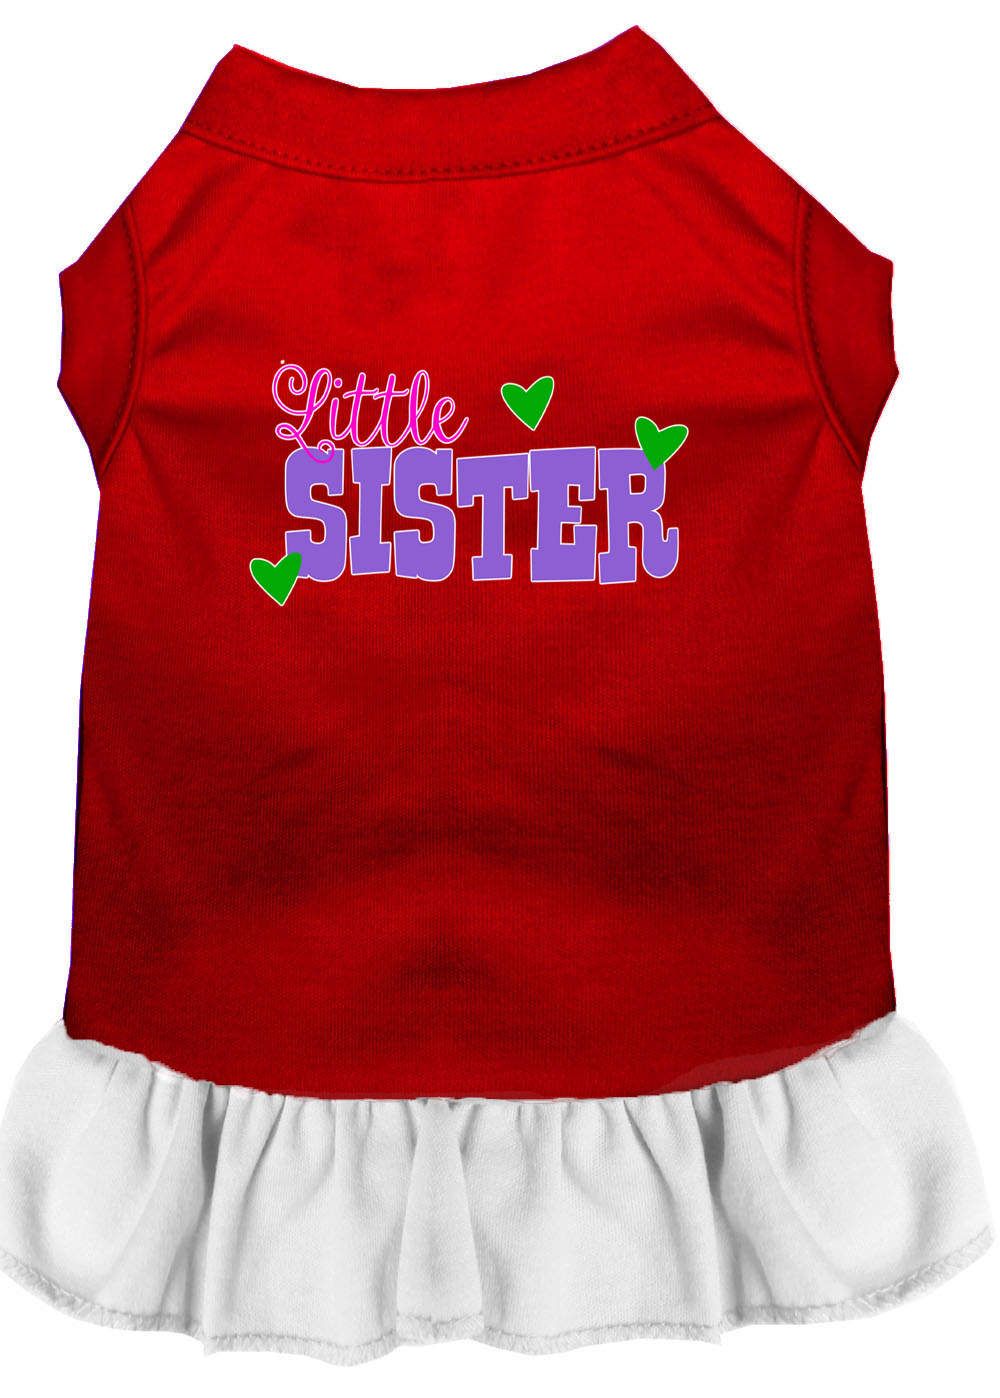 Little Sister Screen Print Dog Dress Red with White Sm